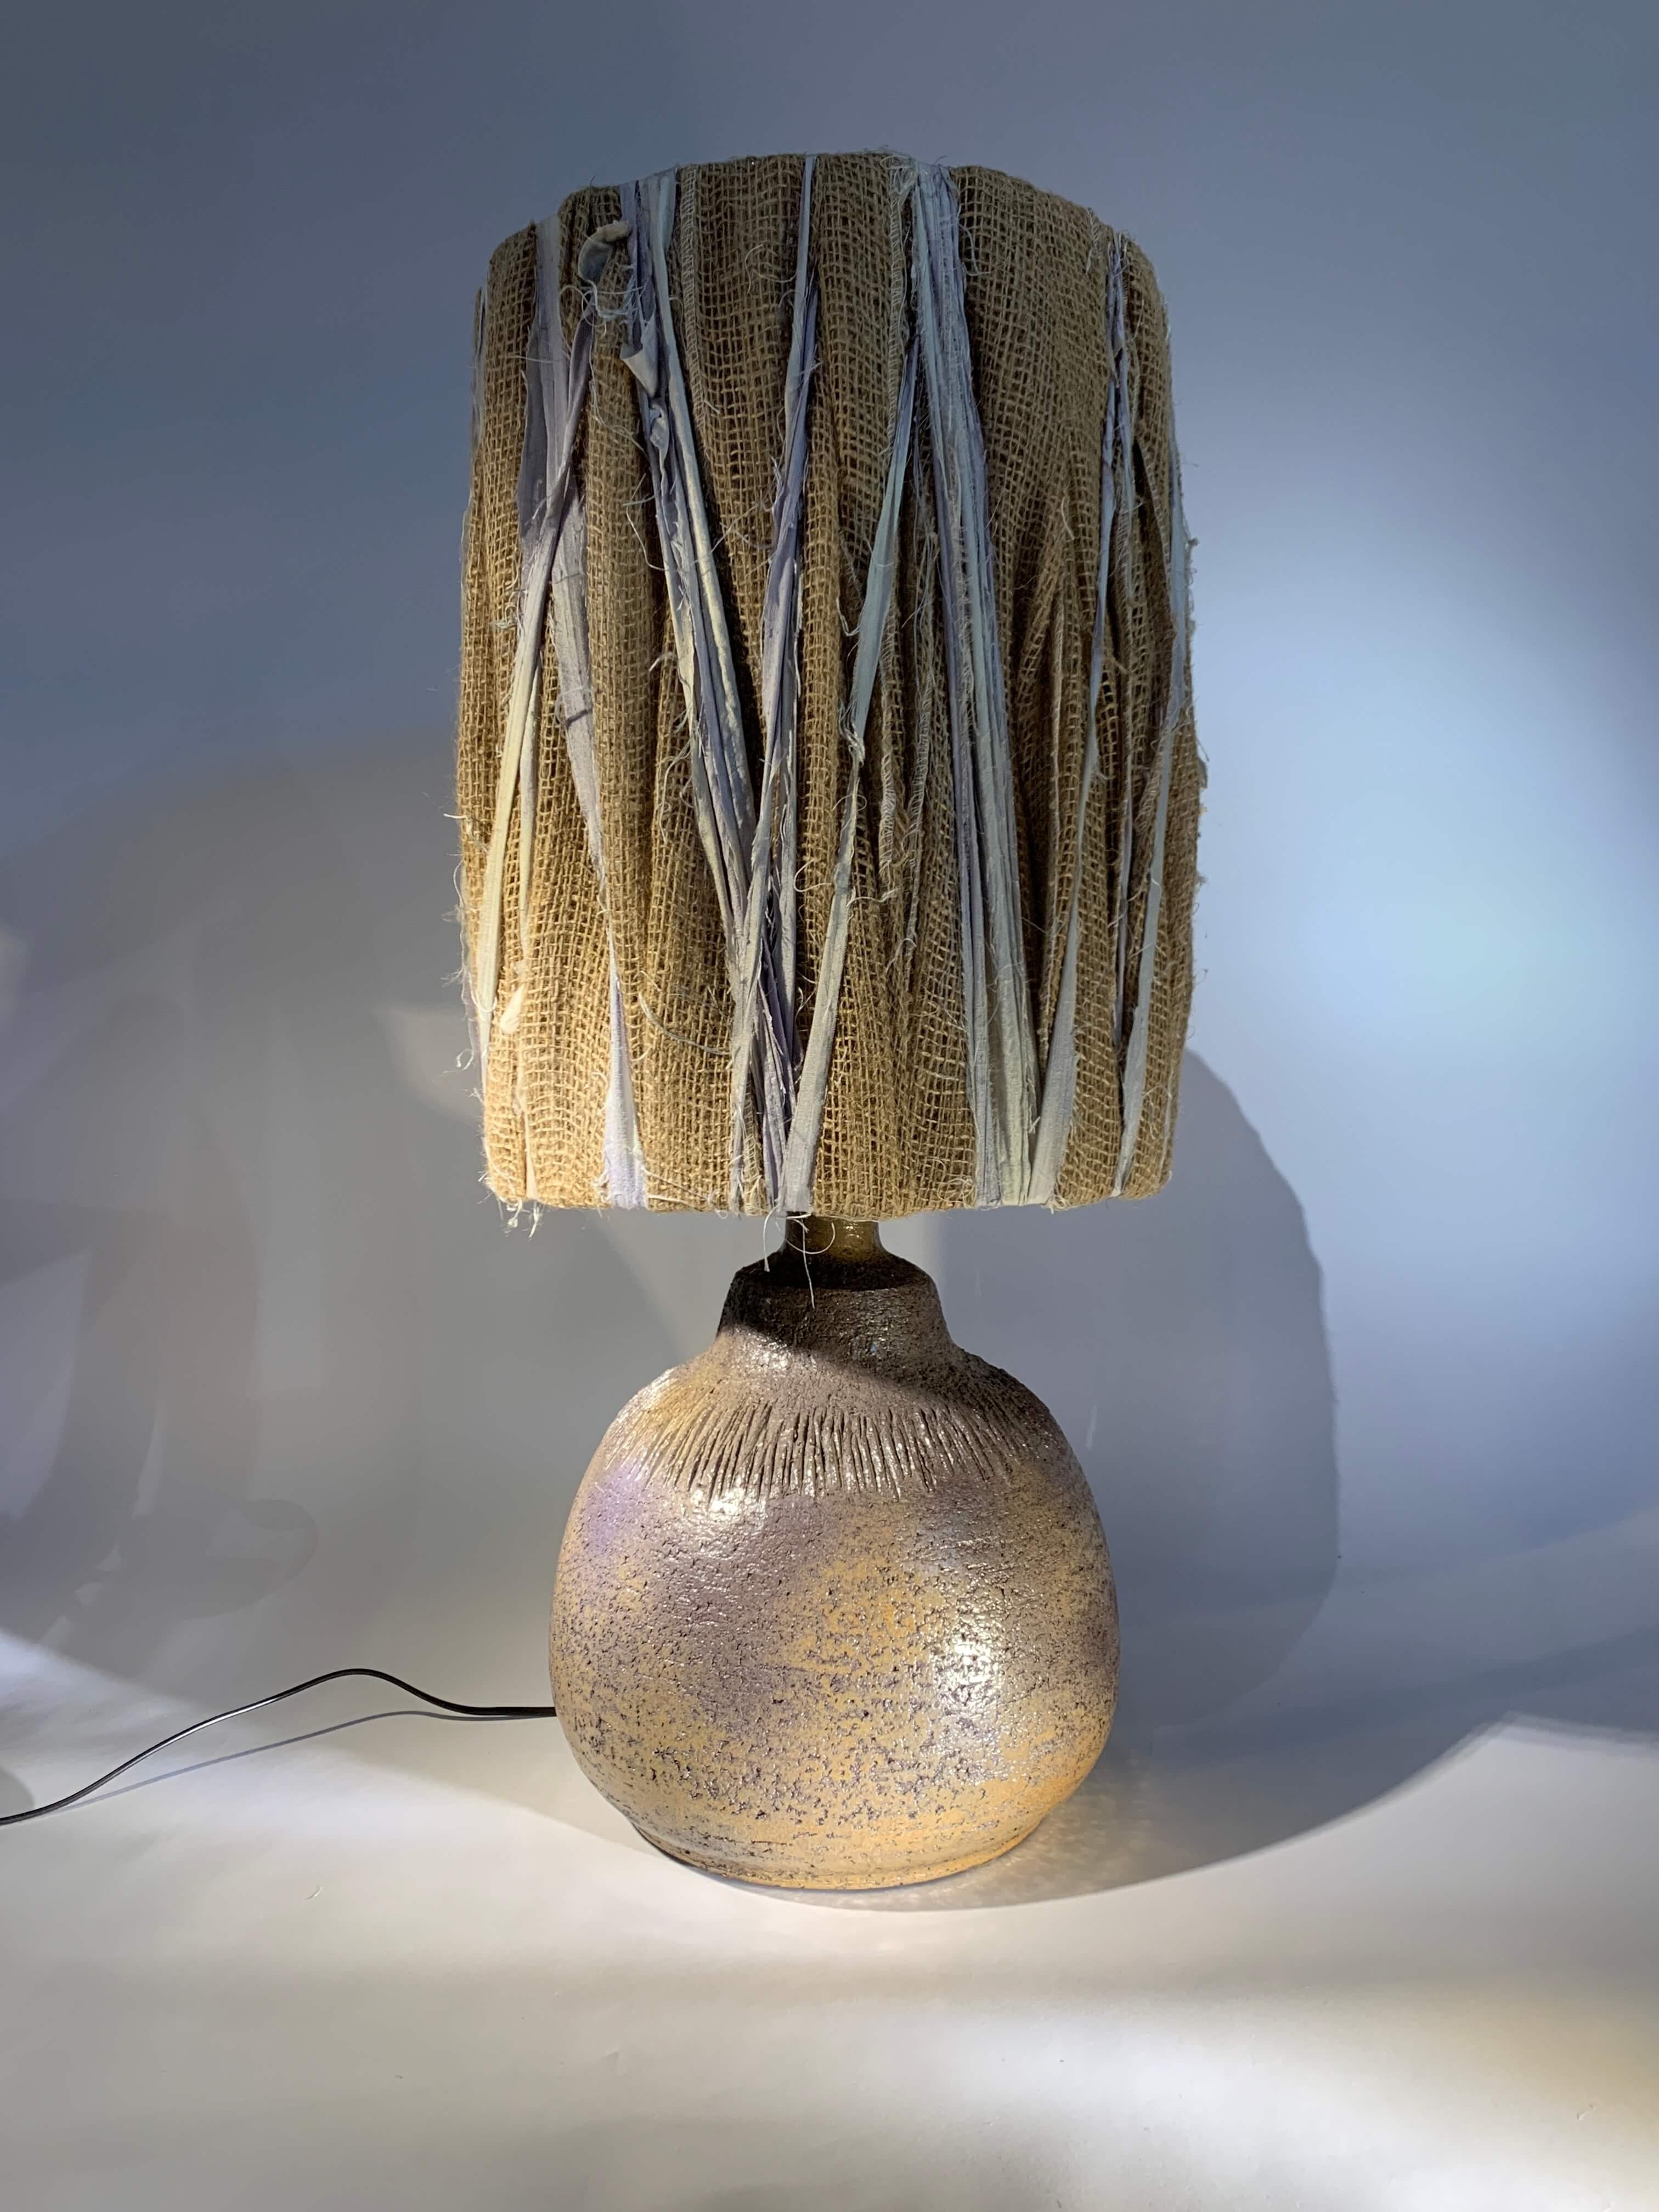 Exceptional French ceramic table lamp by Huguette Bessone.
Lamp base in chamotte earth, circular and generous body with incised decoration.
This ceramic, whose shape and decoration are unusual for Huguette Bessone, is also interesting for its brown